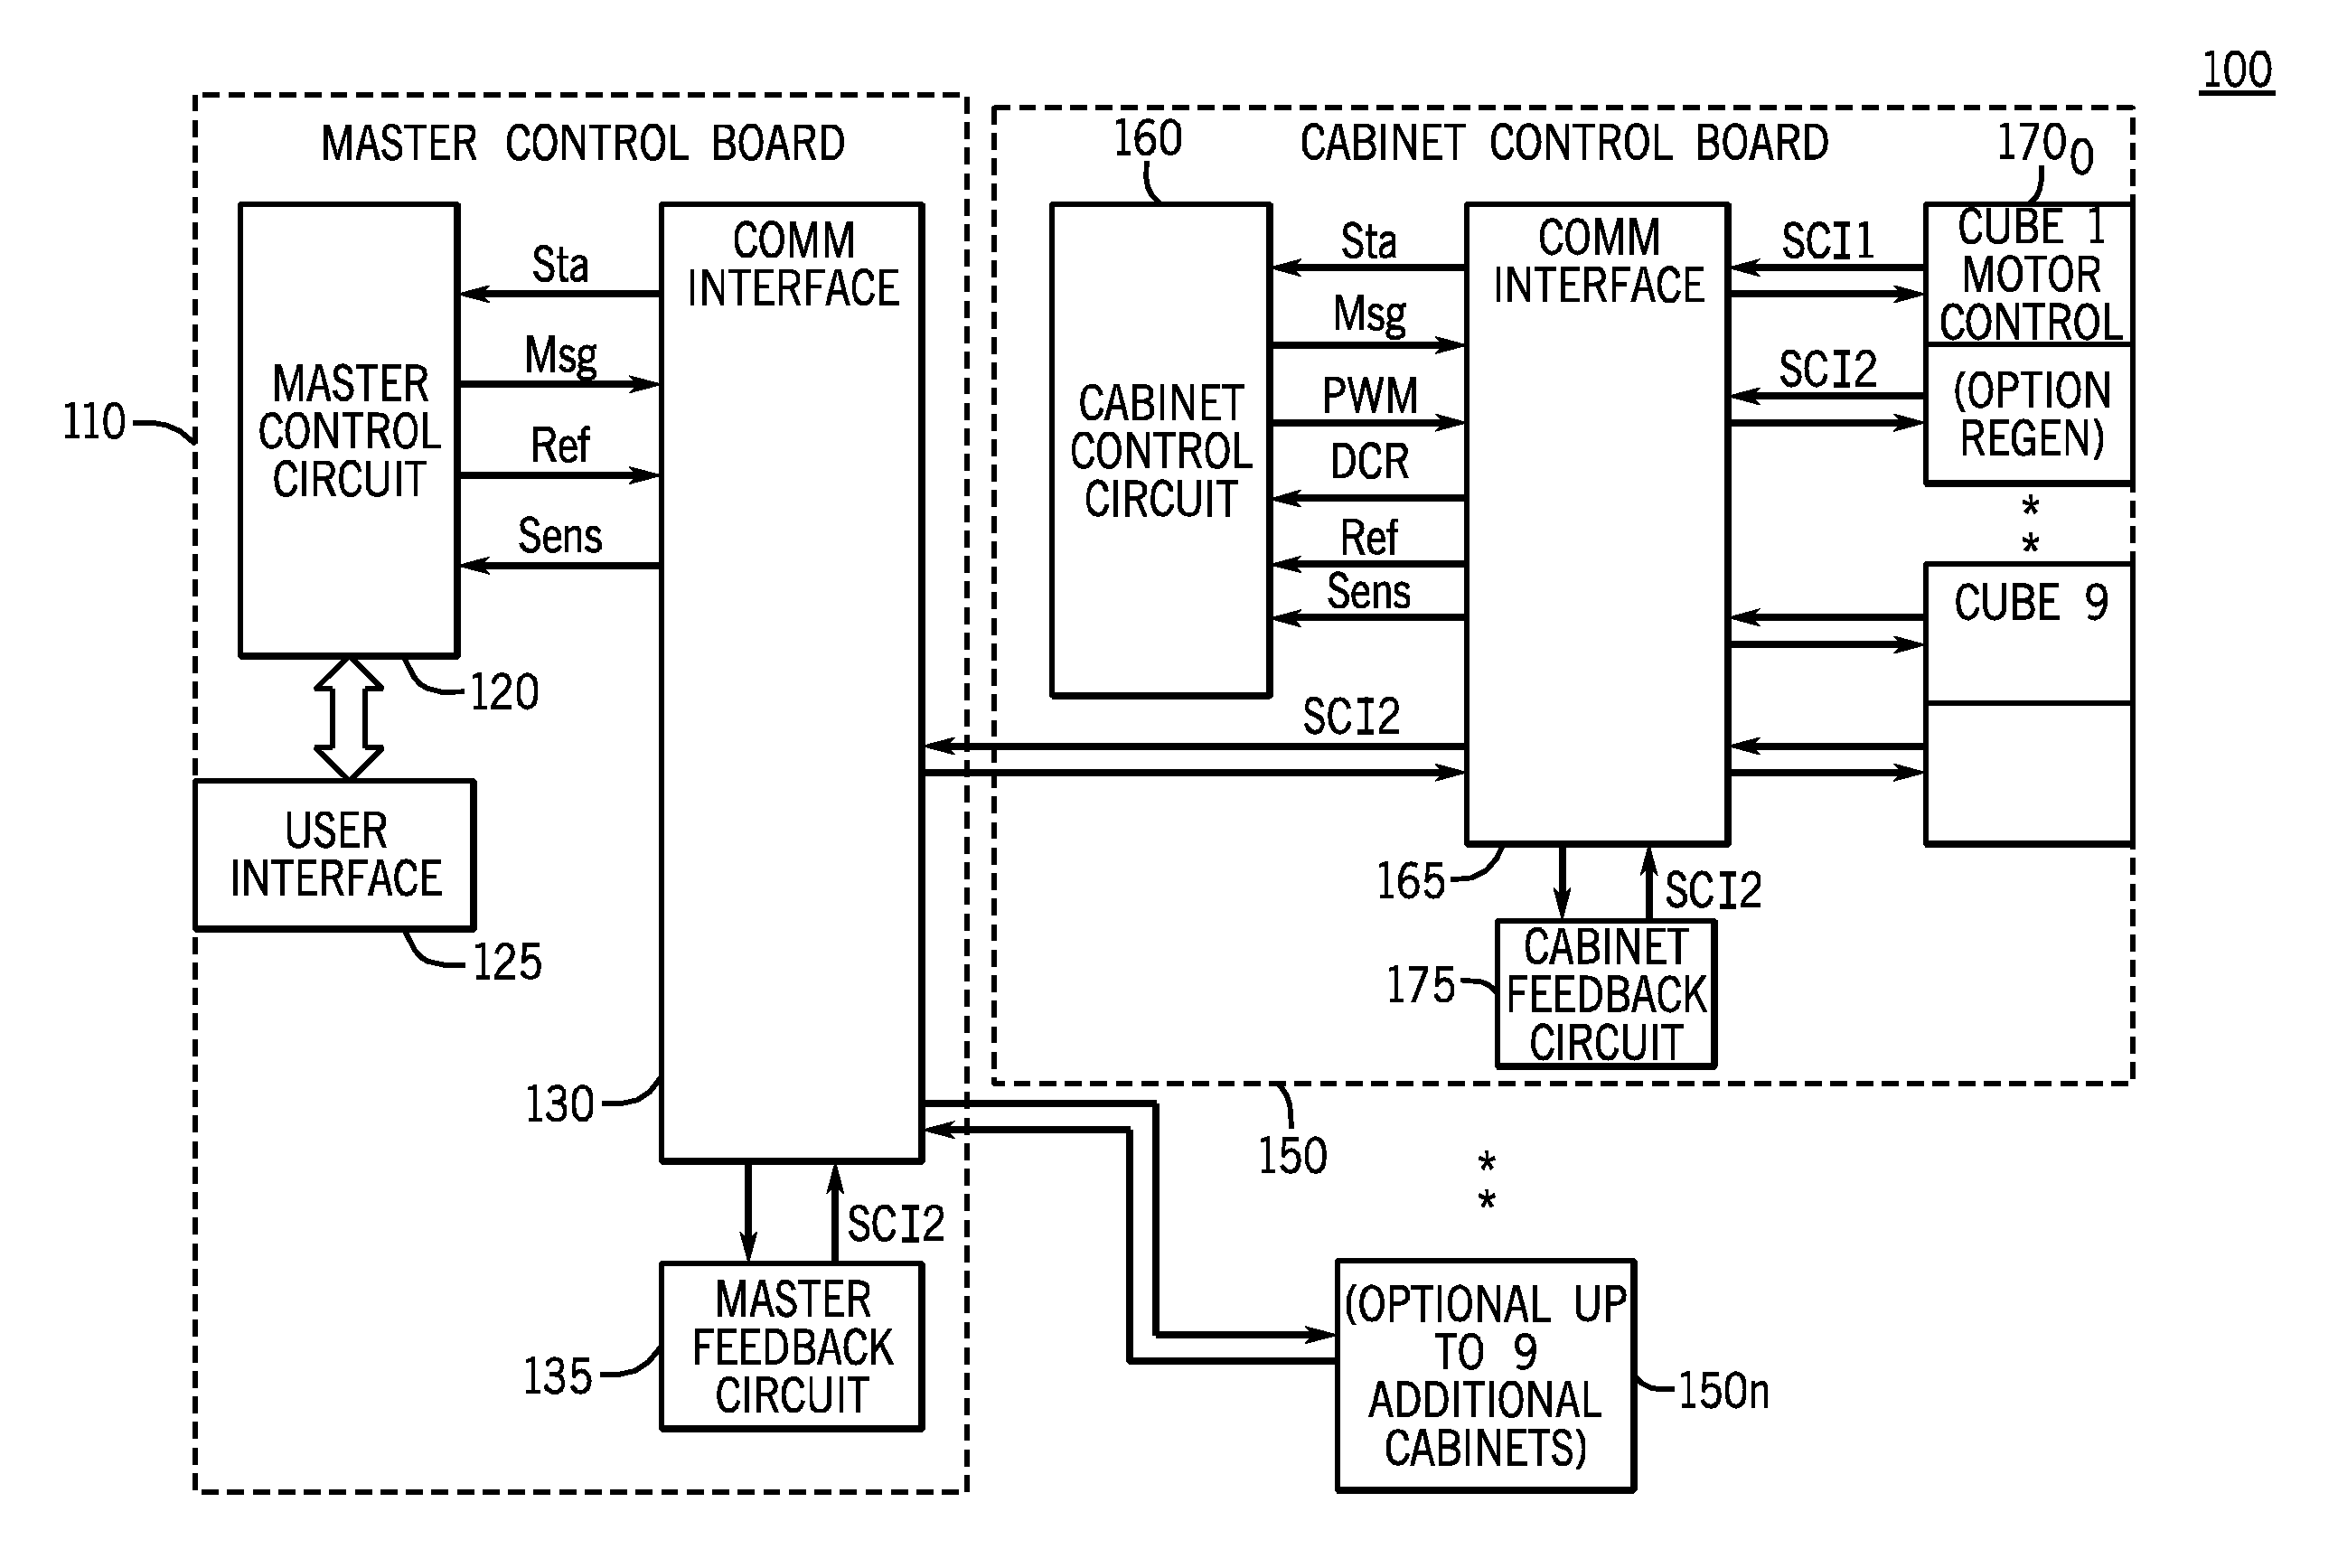 Providing Multiple Communication Protocols For A Control System